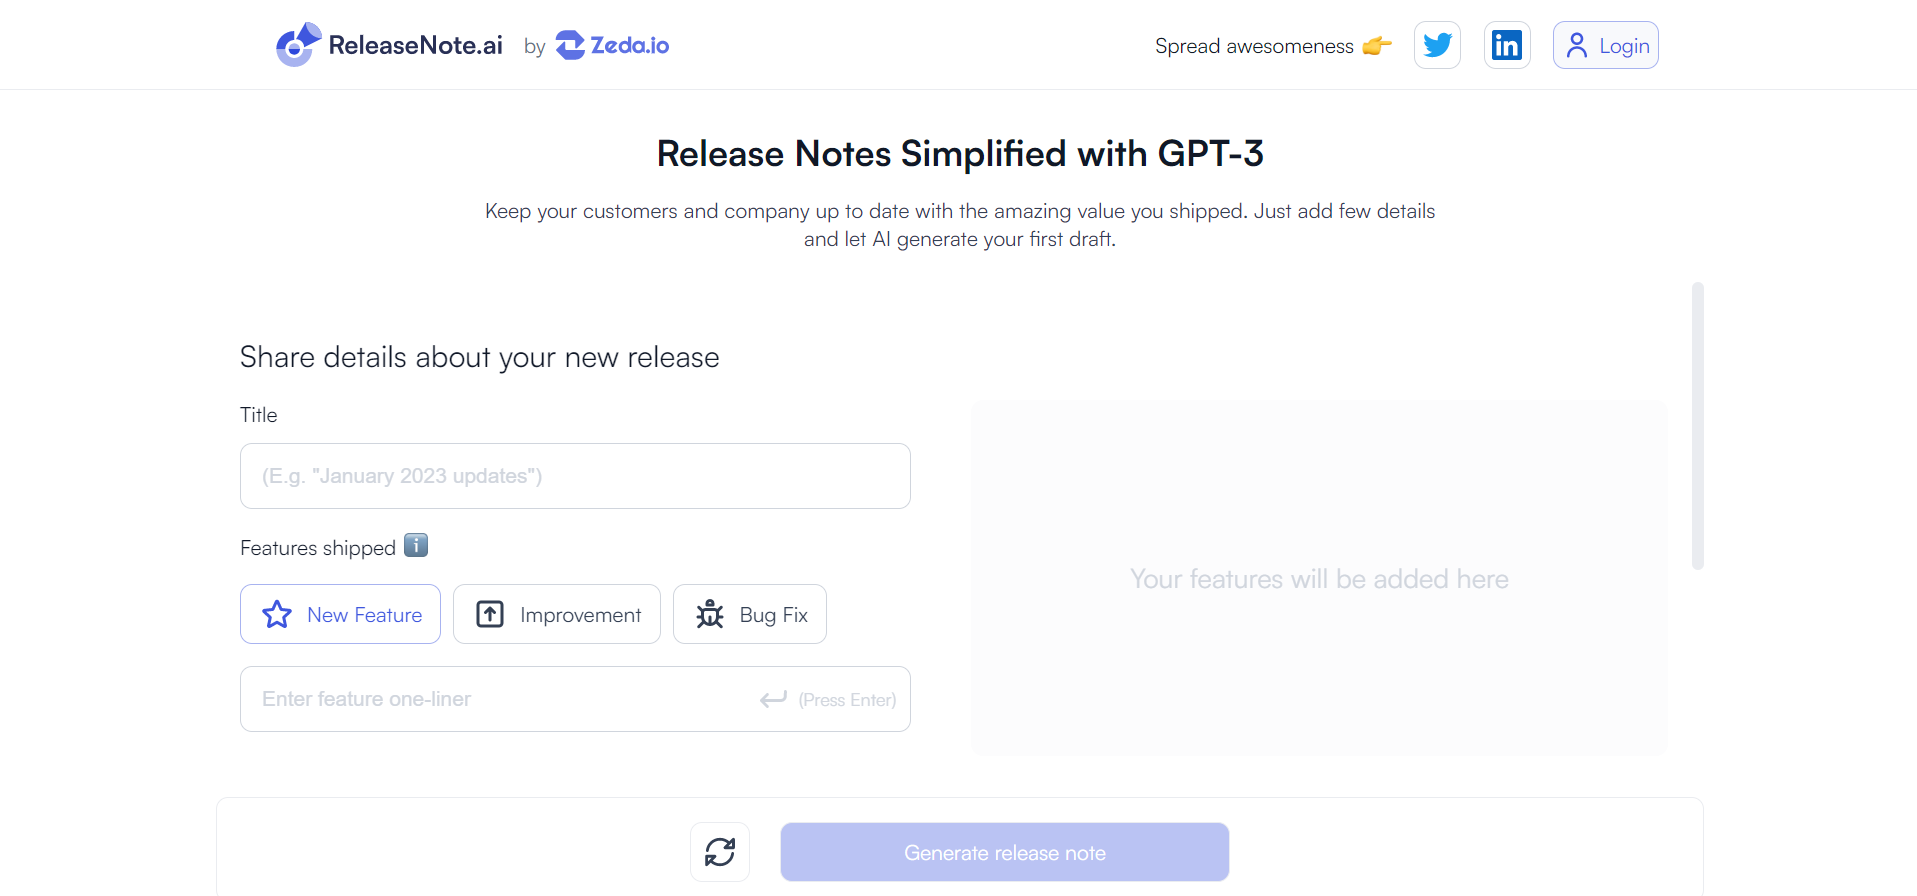 Get Ready to Simplify Your Release Notes with the Magic of  Releasenote.ai!